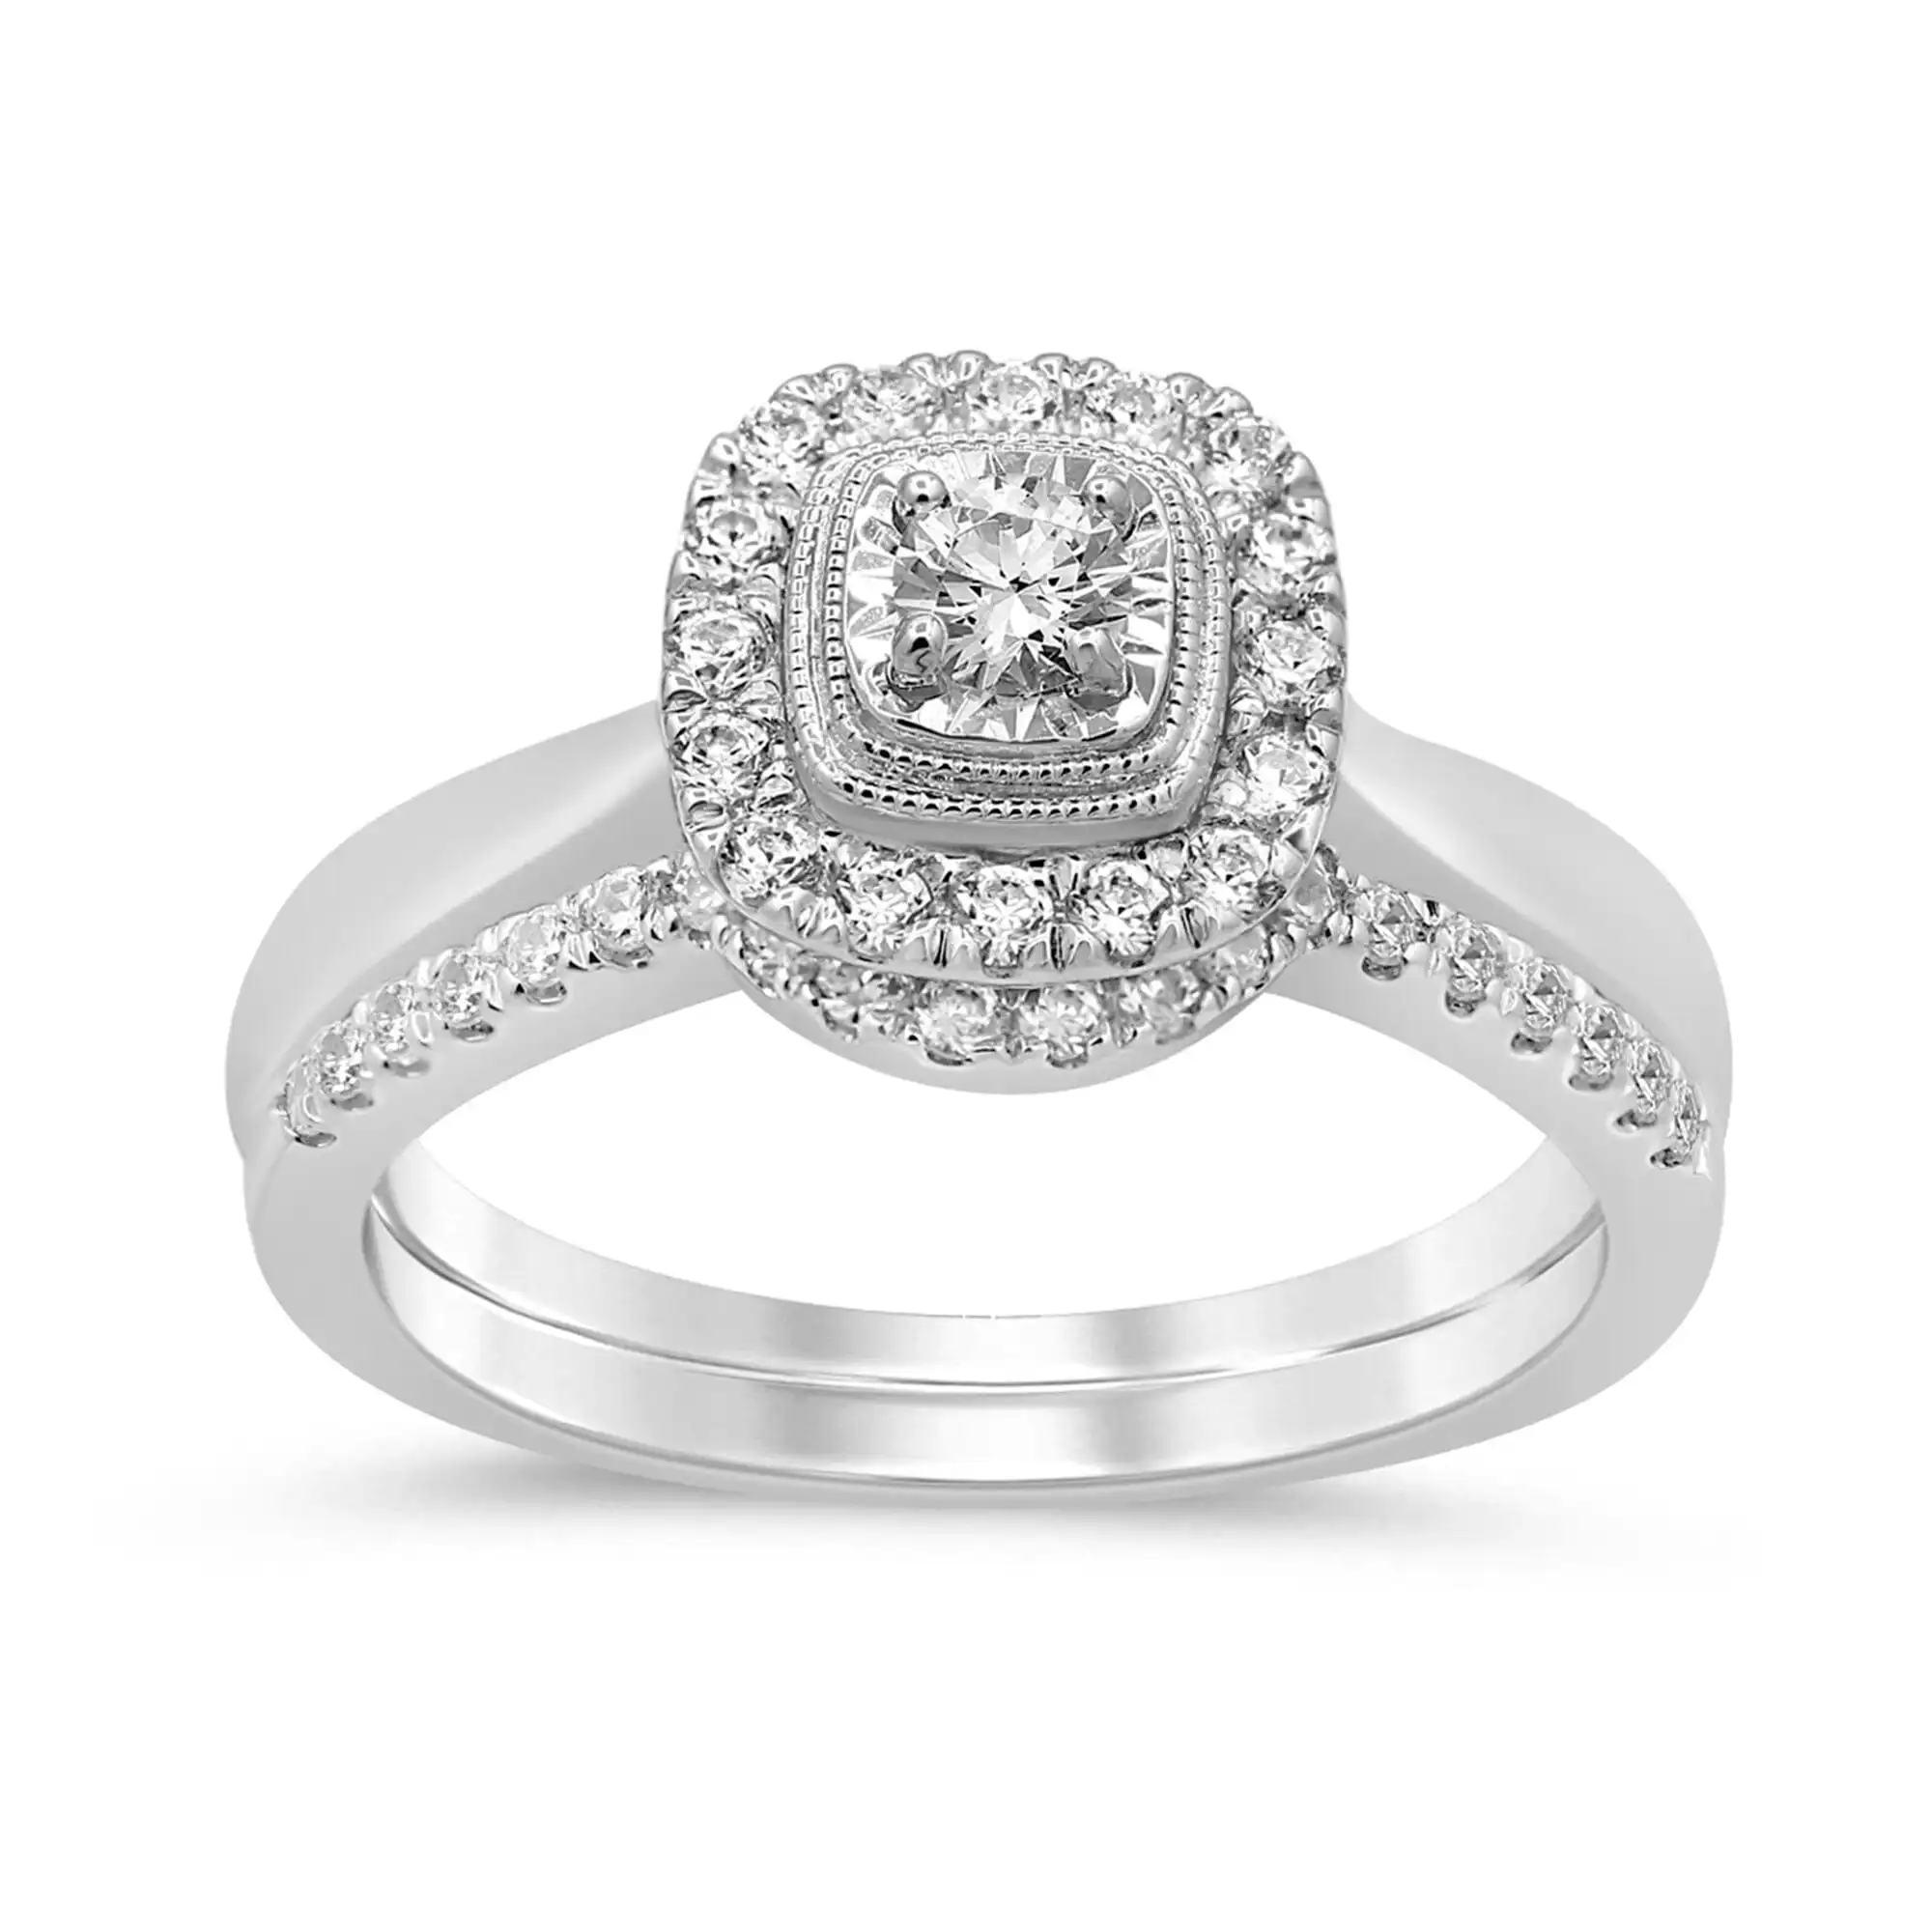 Meera Square Solitaire with 0.50ct of Laboratory Grown Diamonds in 9ct White Gold